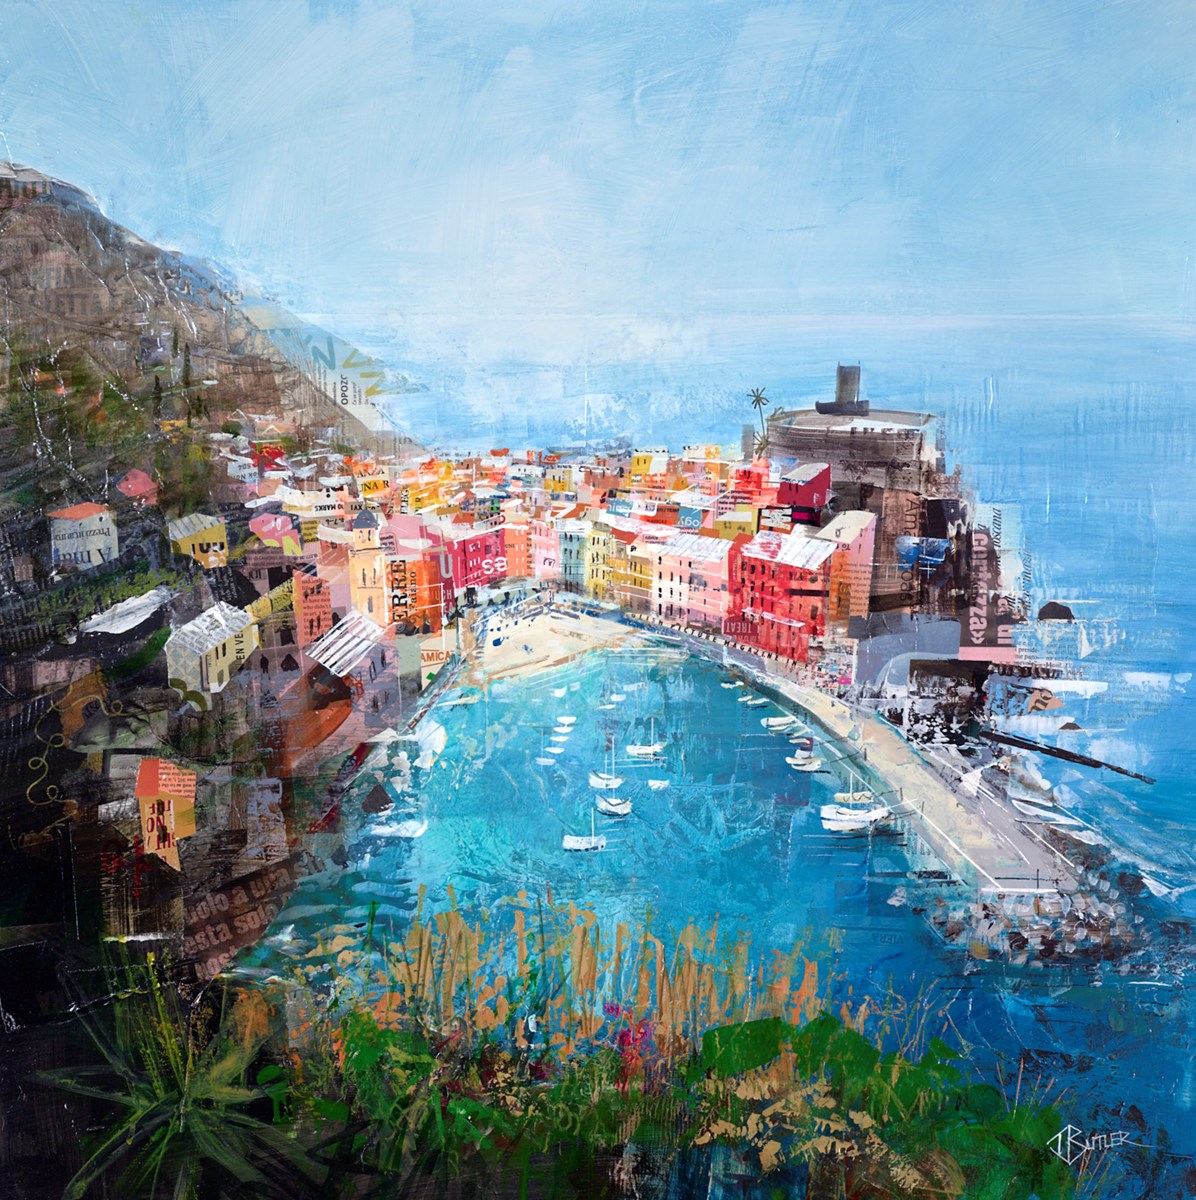 View of Vernazza